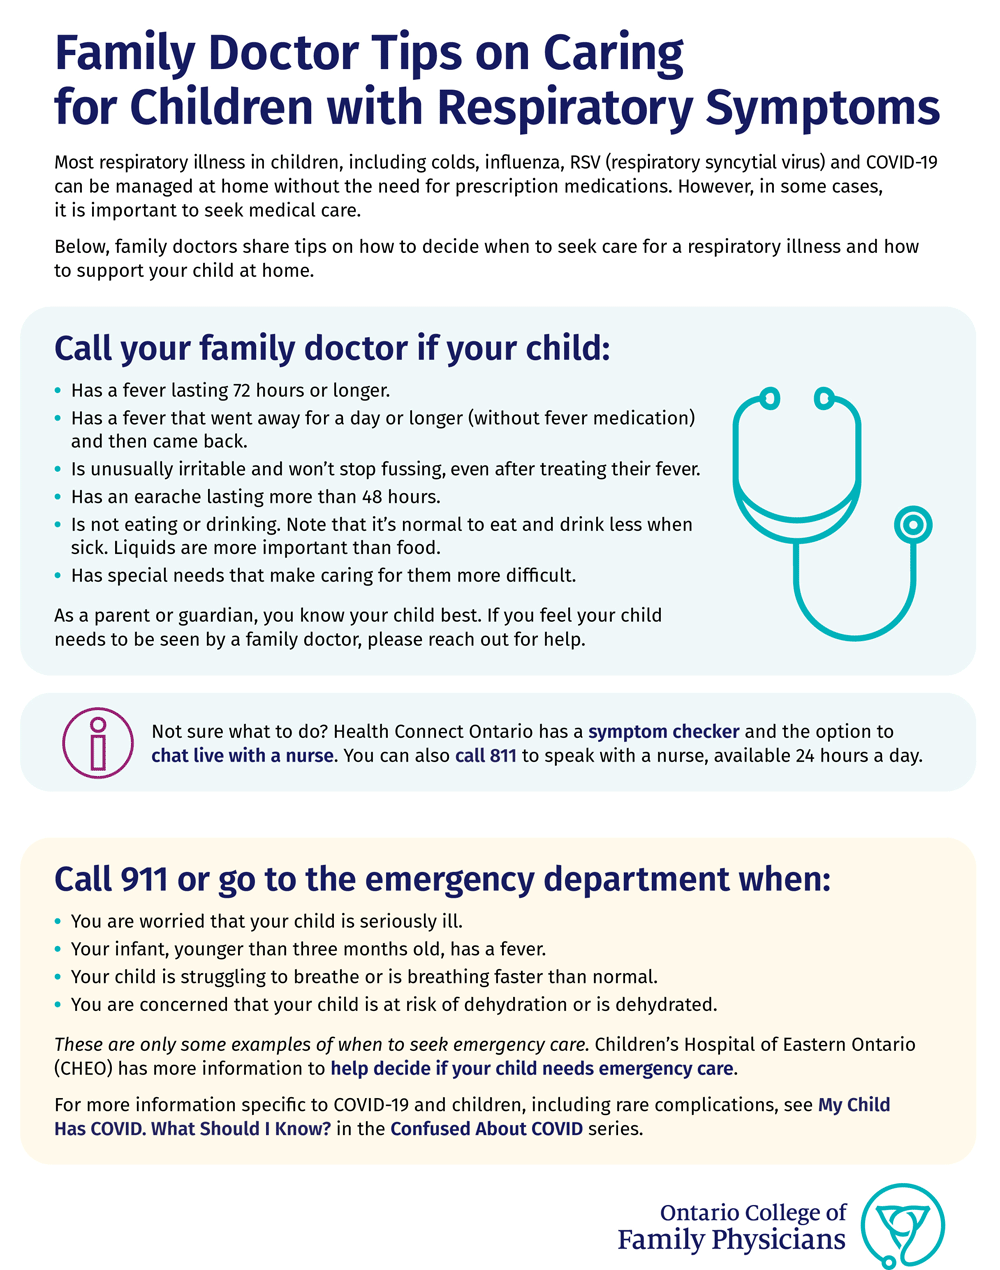 Family Doctor Tips on Caring for Children with Respiratory Symptoms